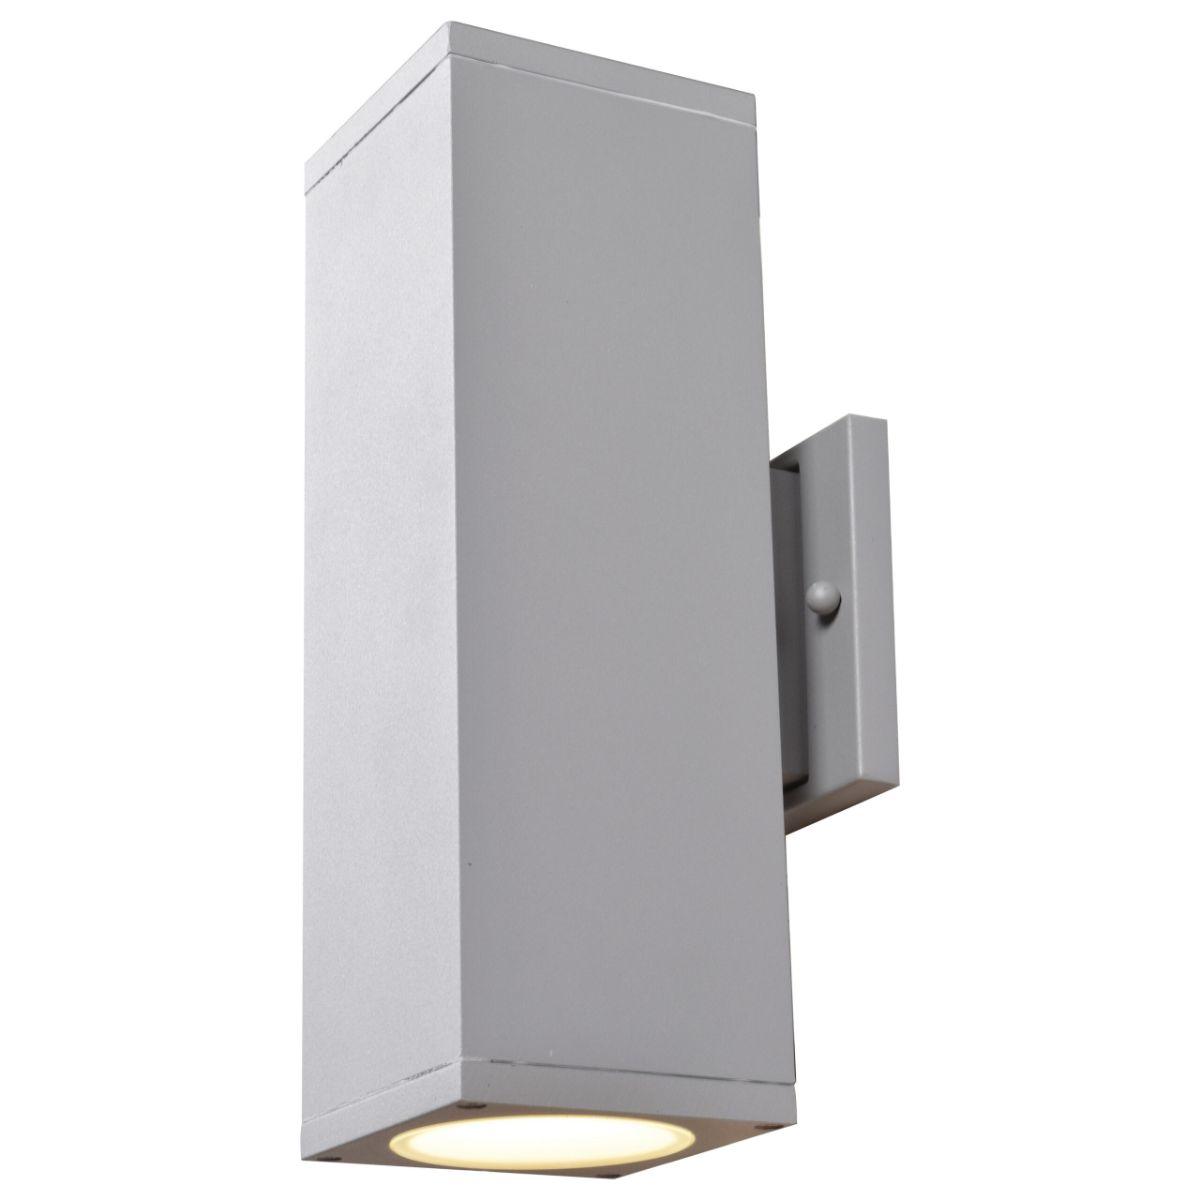 Bayside 12 in. LED Outdoor Wall Sconce